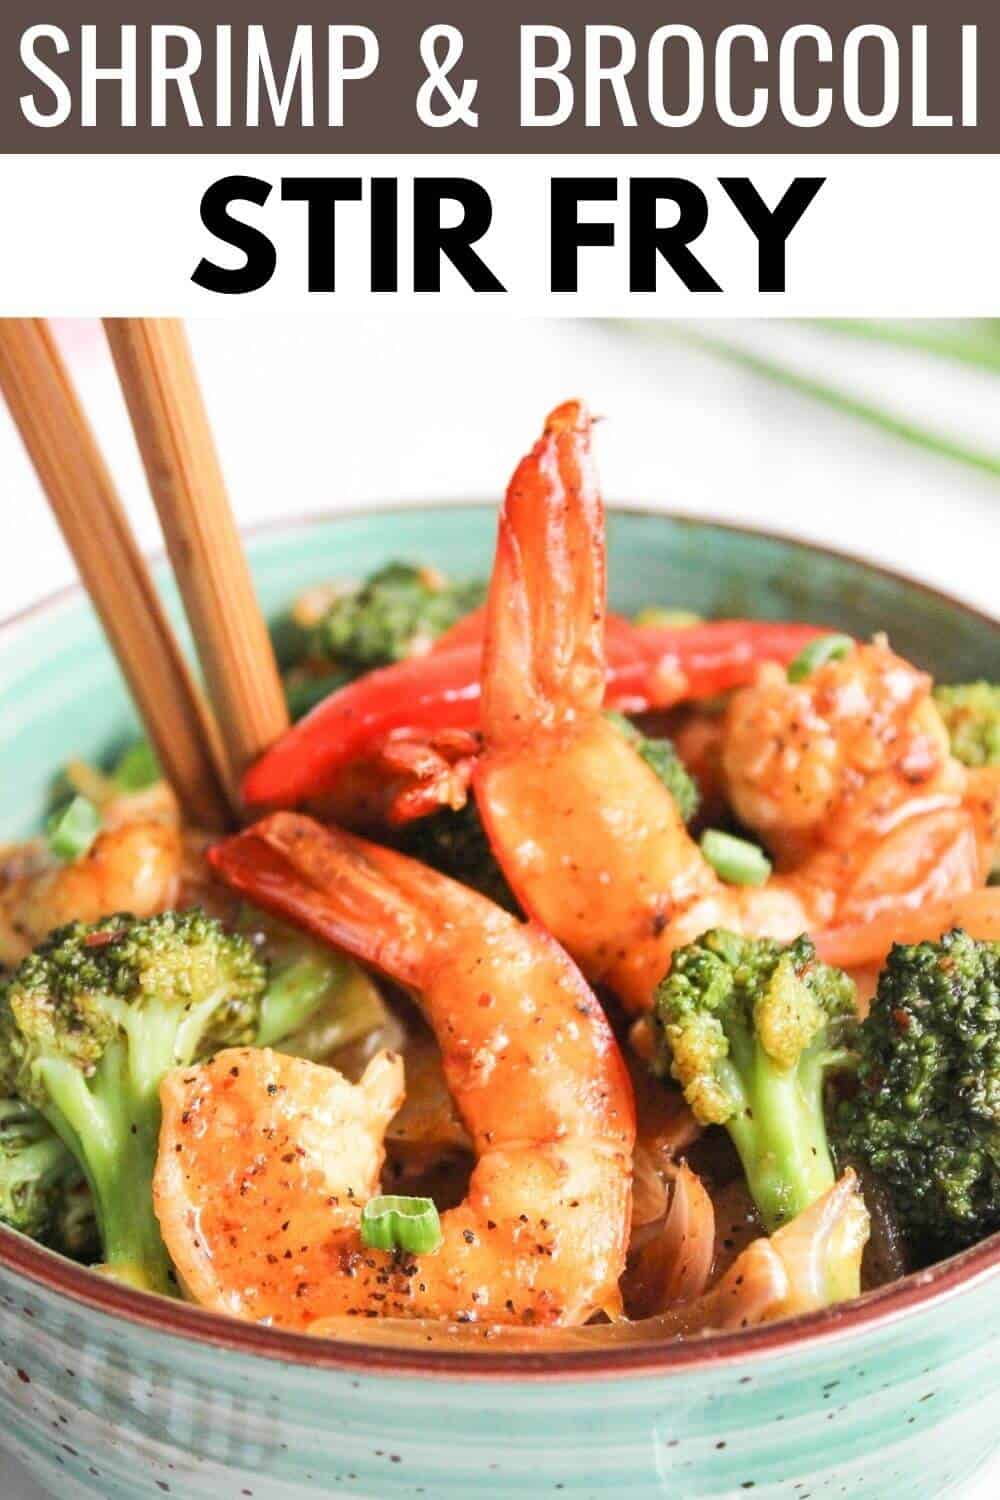 Shrimp and broccoli stir fry with recipe title text overlay.